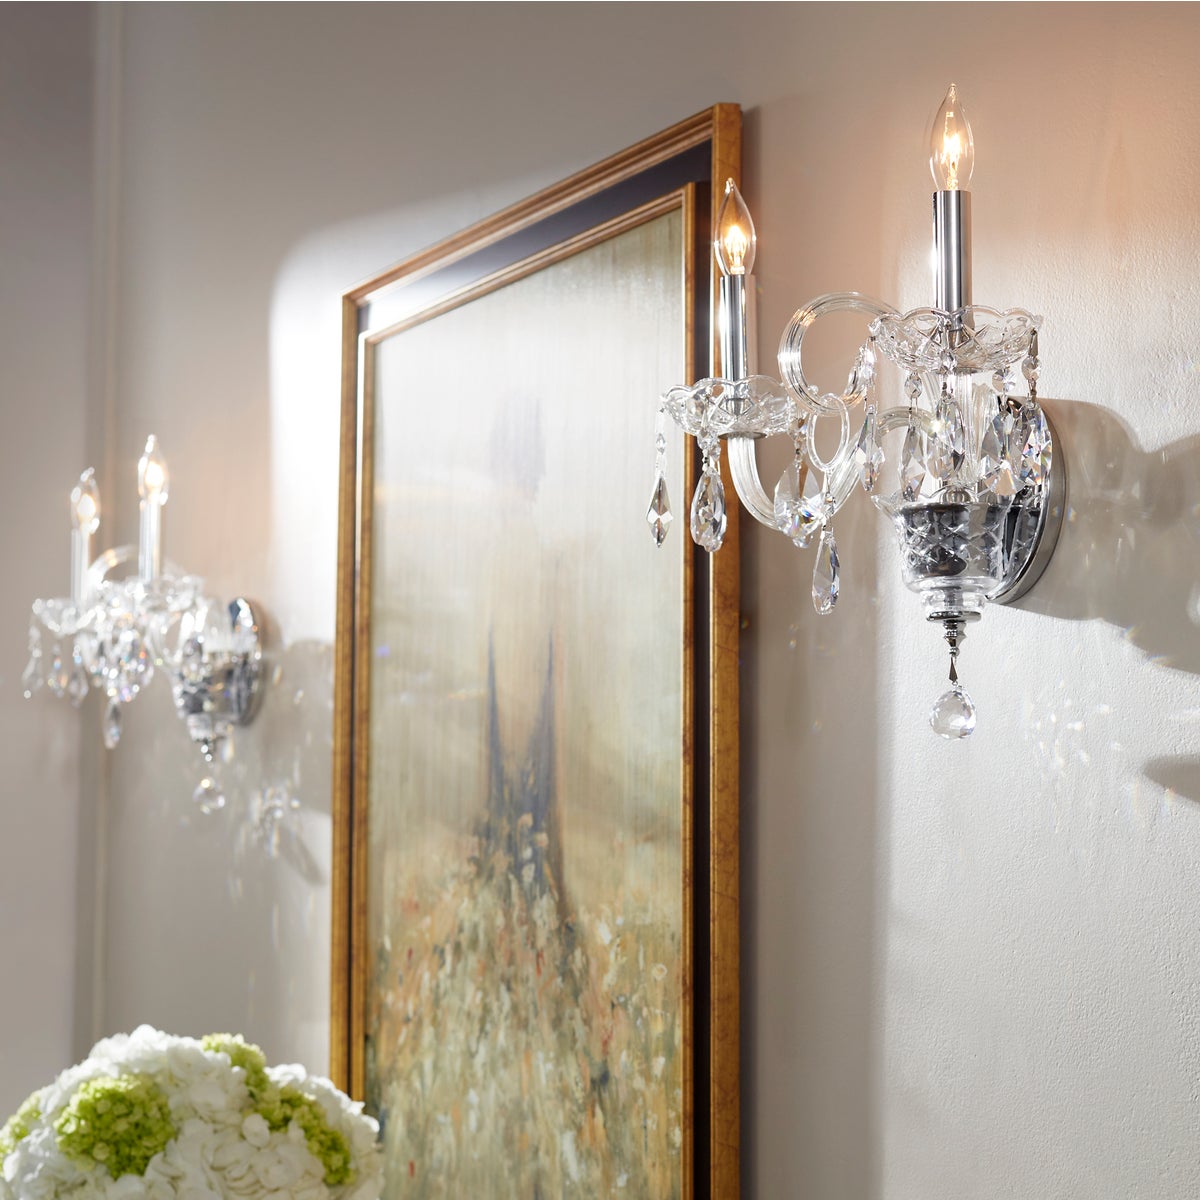 Crystal Wall Sconce with two lights, featuring tear drop crystal accents for dazzling, prismatic effects. Chrome finish.